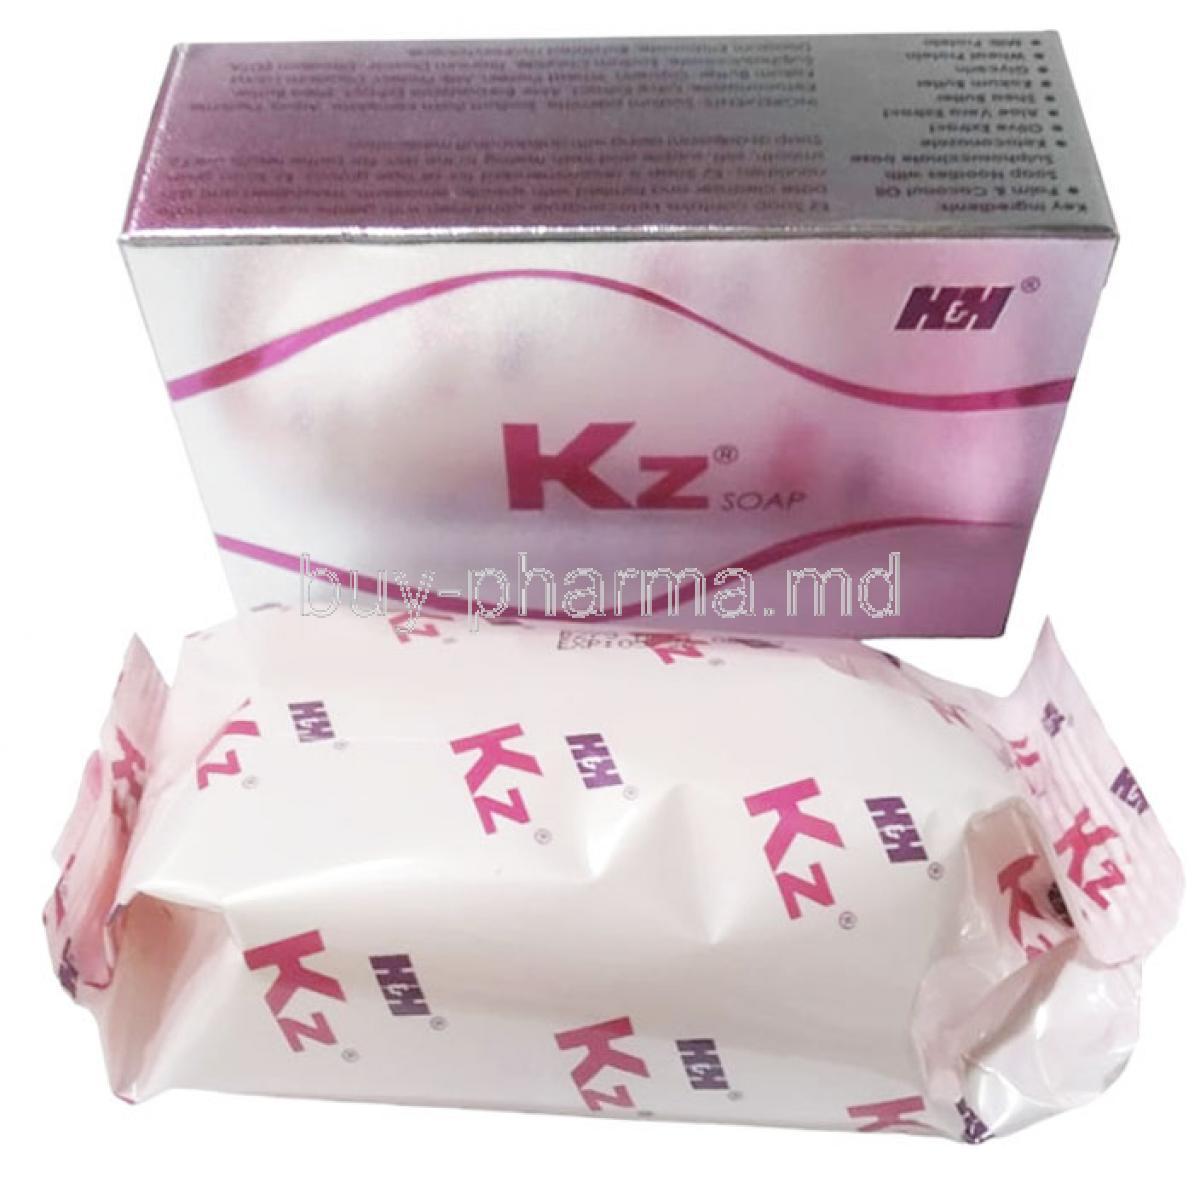 KZ Soap, Ketokonazole and others, Soap 75g, Hegde and Hegde Pharmaceutical LLP, Box front view, Soap packaging